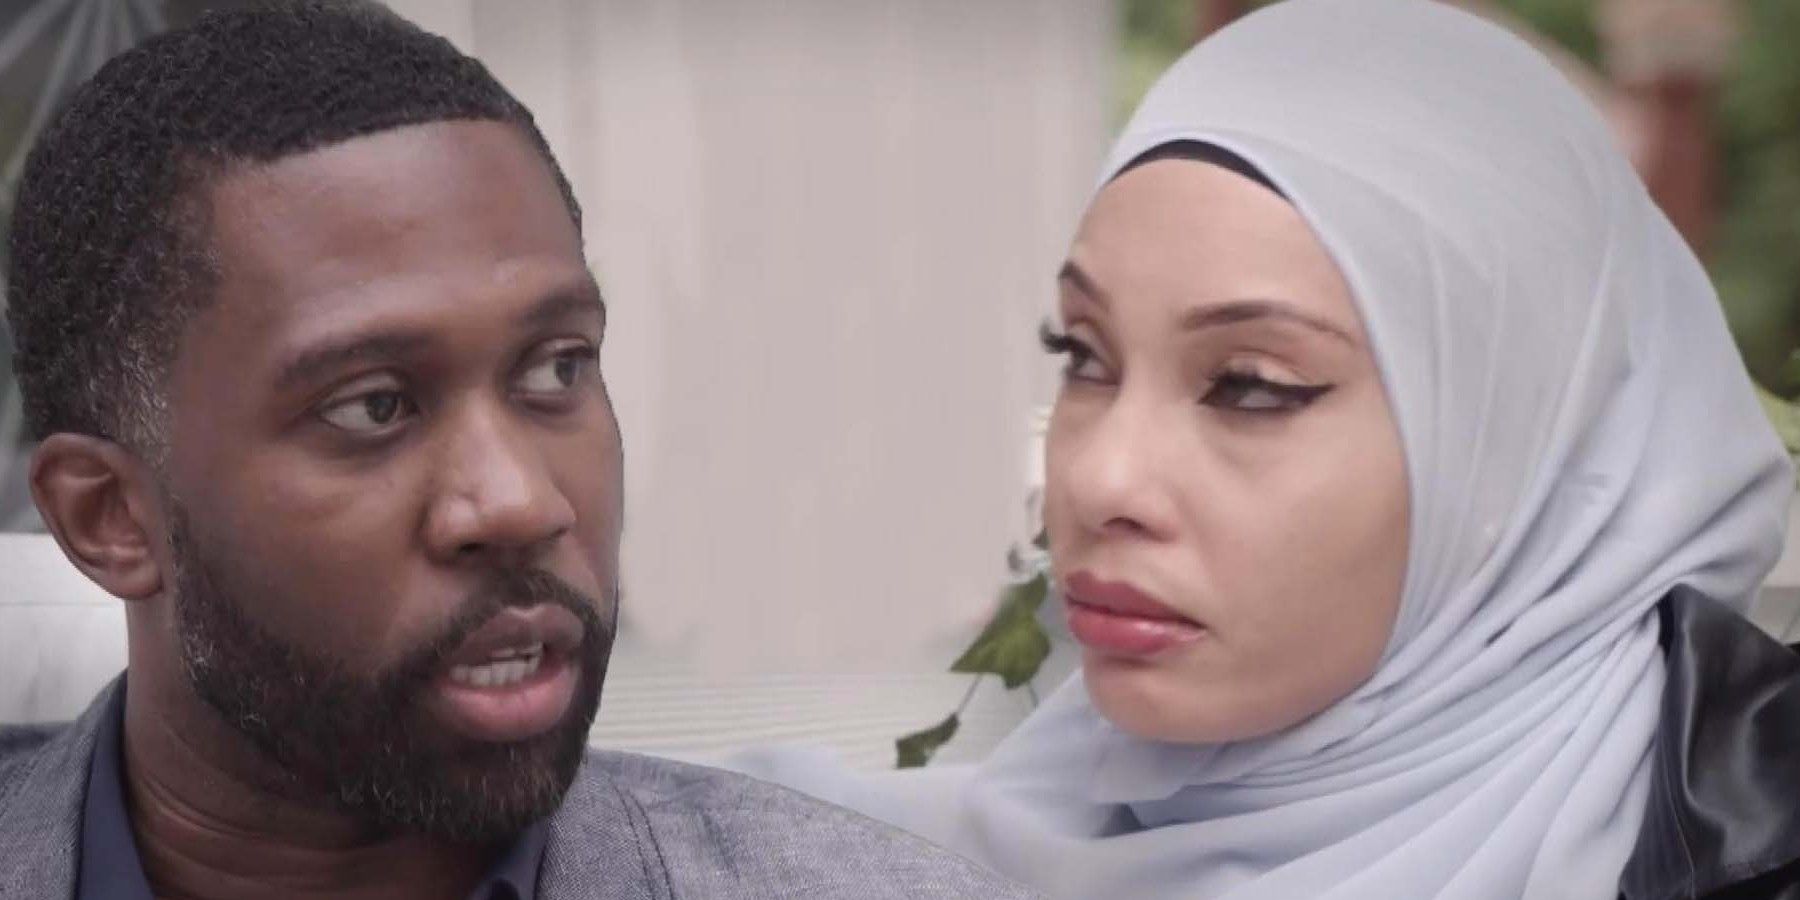 Bilal Hazziez and Shaeeda Sween from 90 Day Fiancé: Happily Ever After looking at each other with serious expressions